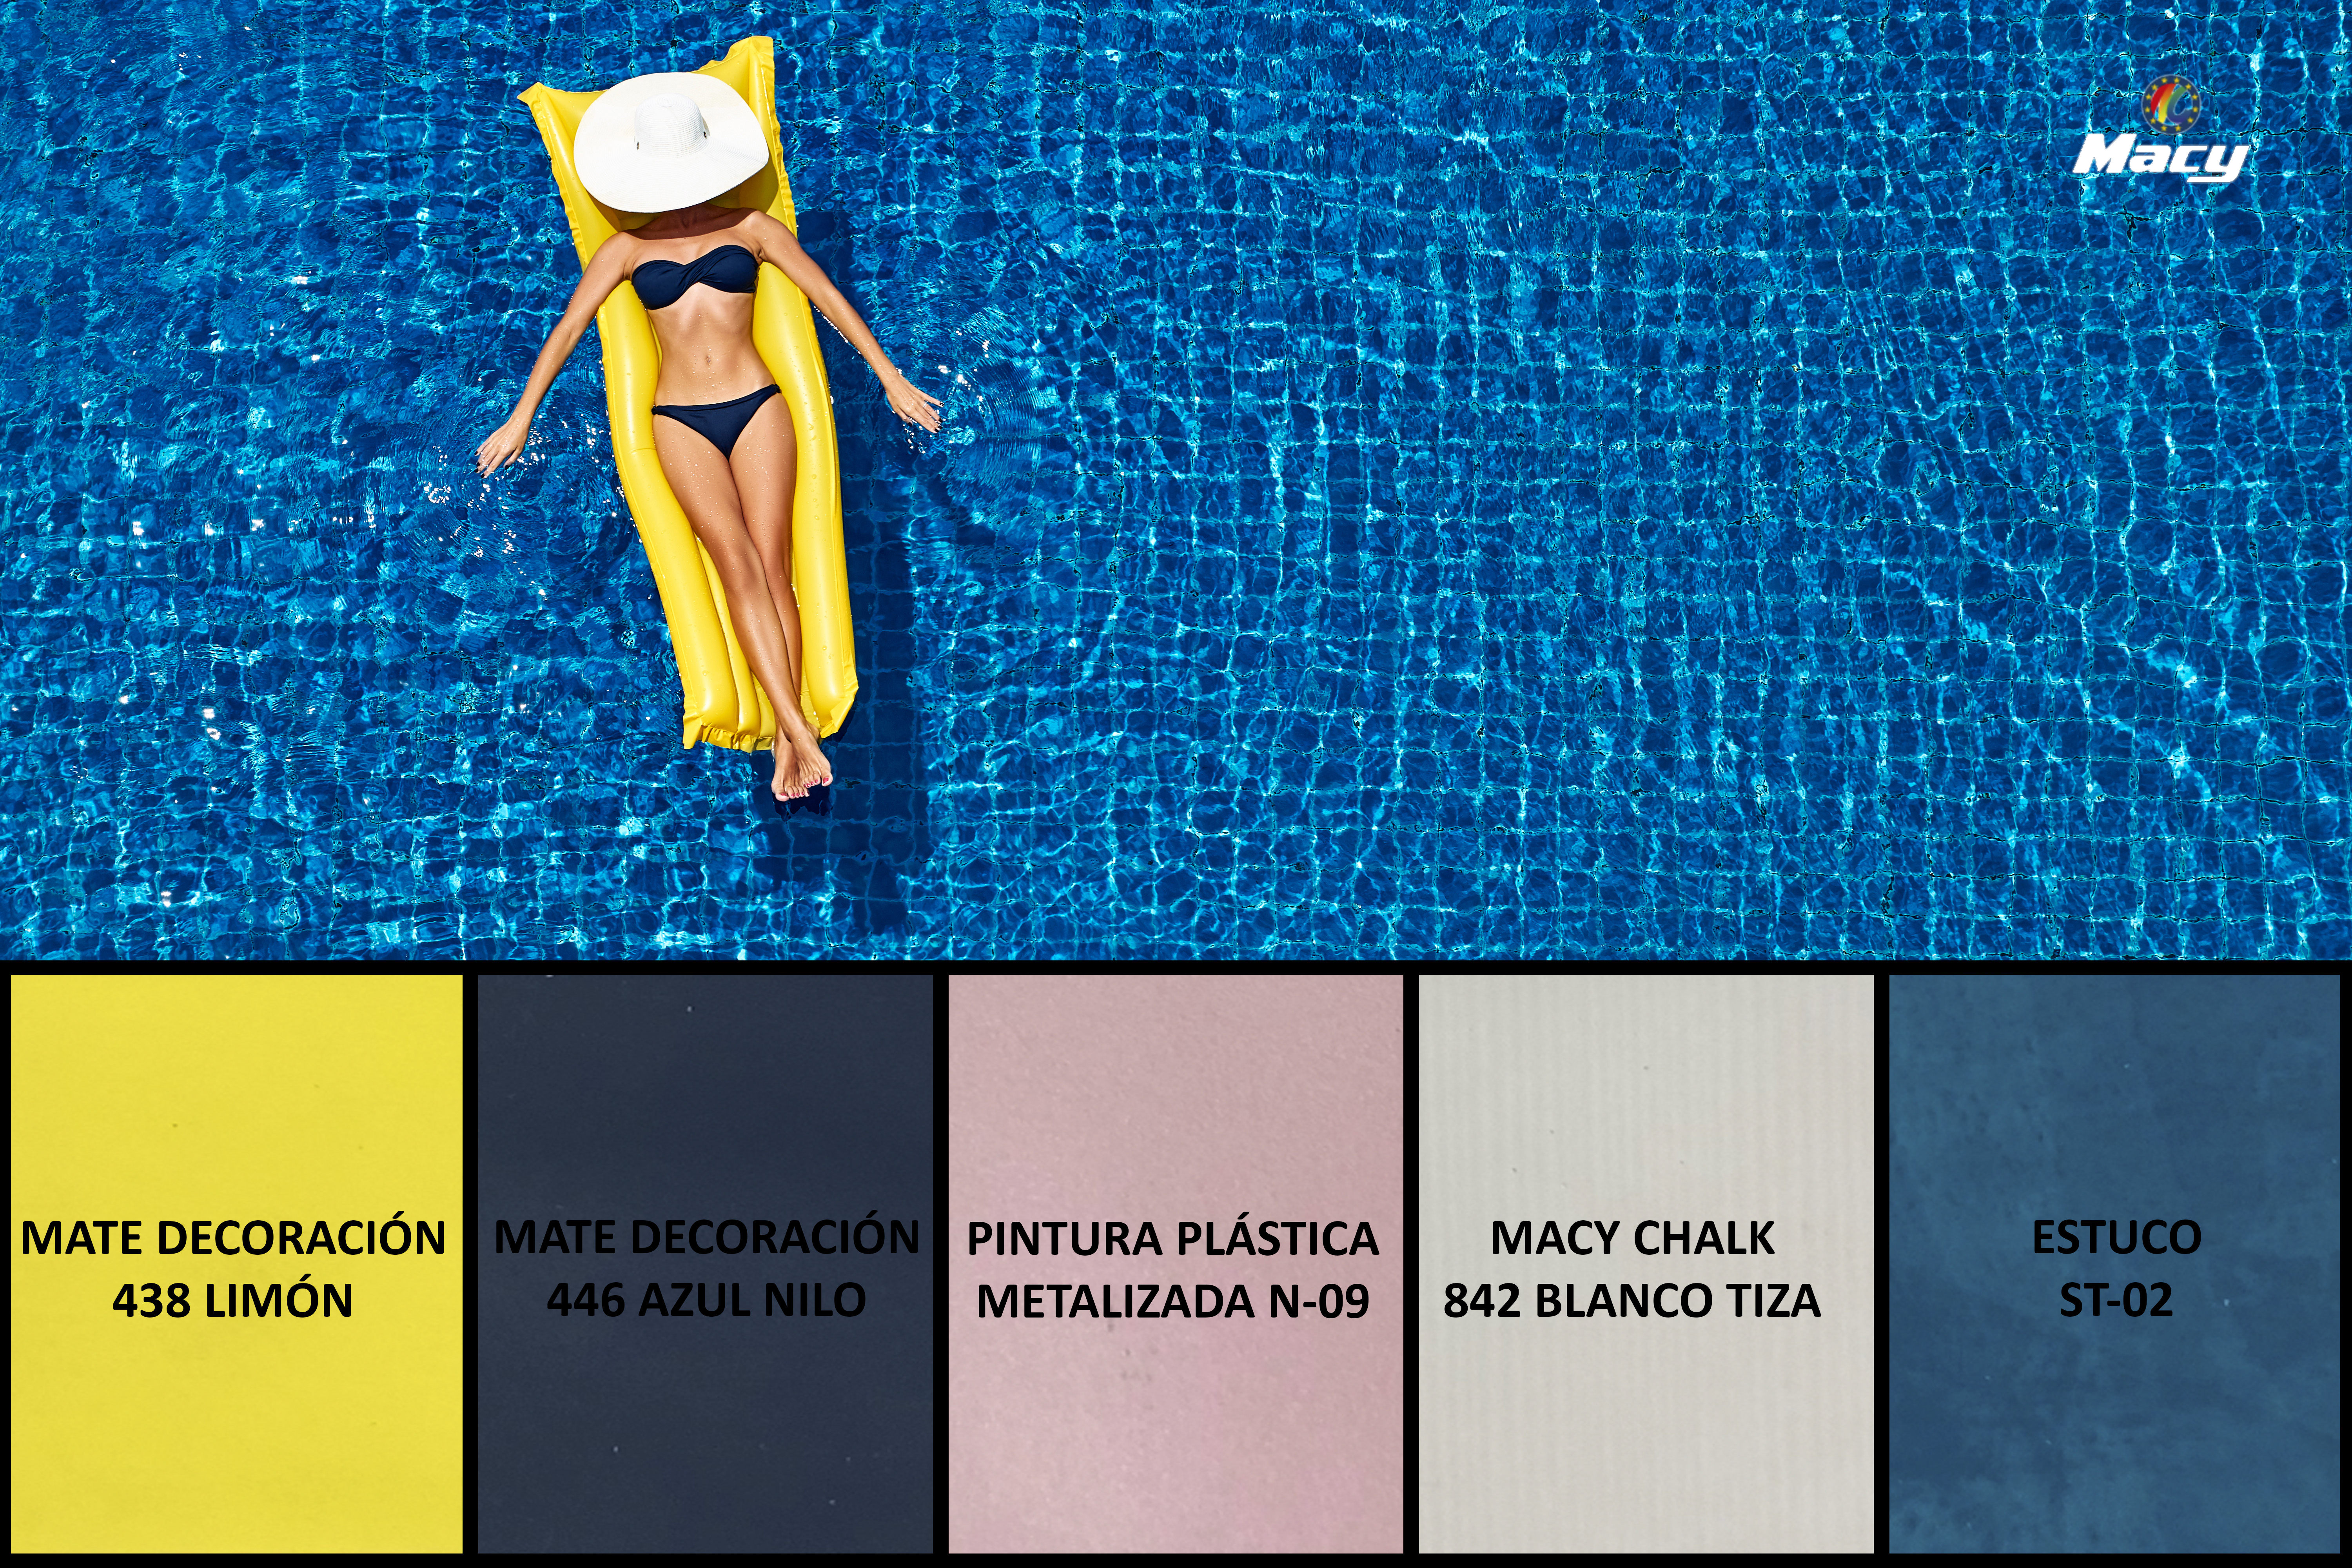 A SWIMMING-POOL, THE SOURCE OF INSPIRATION FOR OUR LATEST COLOR PROPOSAL